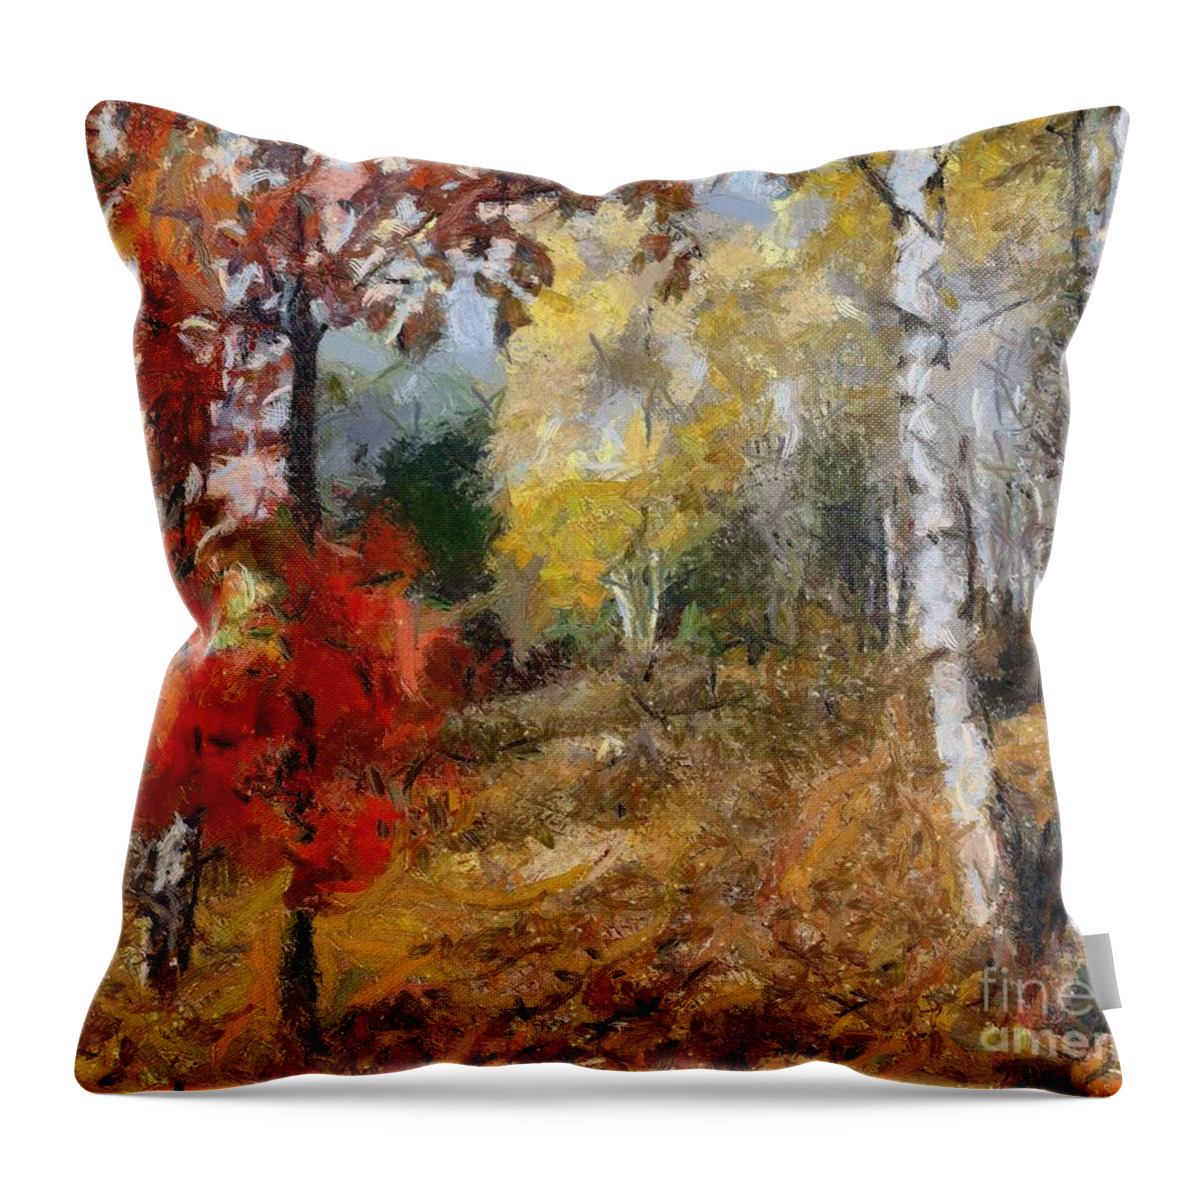 Landscape Throw Pillow featuring the painting On The Edge Of The Forest by Dragica Micki Fortuna